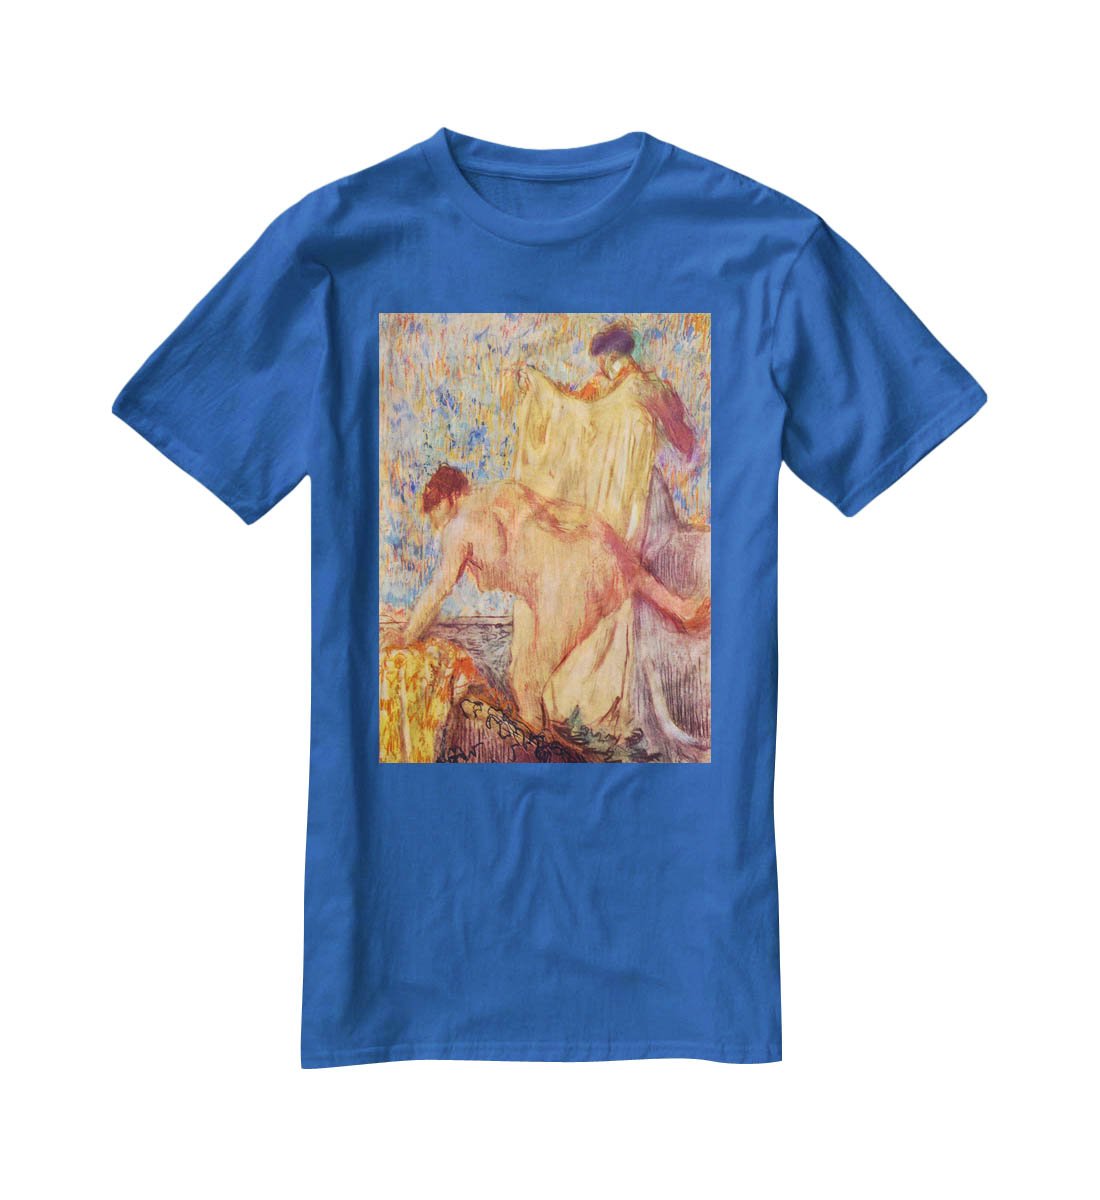 Withdrawing from the bathtub by Degas T-Shirt - Canvas Art Rocks - 2